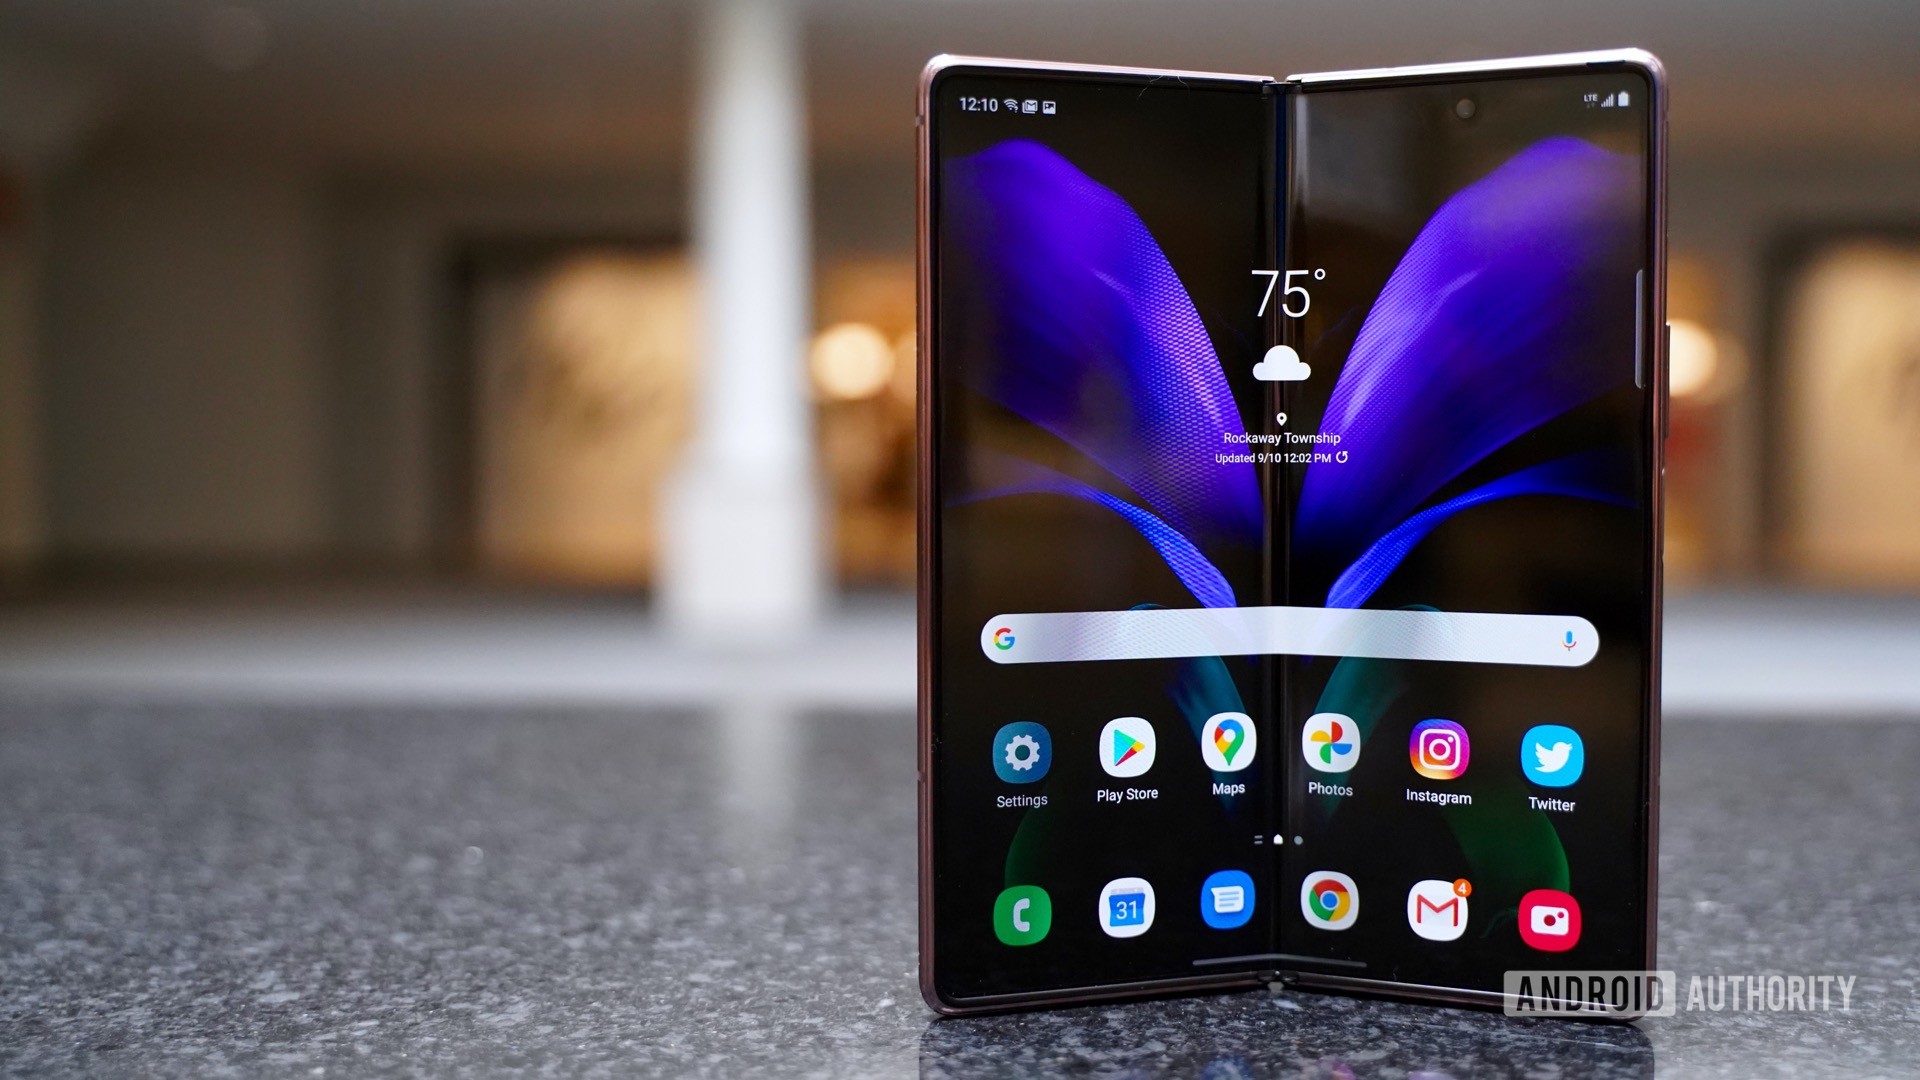 Here are the Samsung Galaxy Z Fold 2 wallpapers - Android Authority